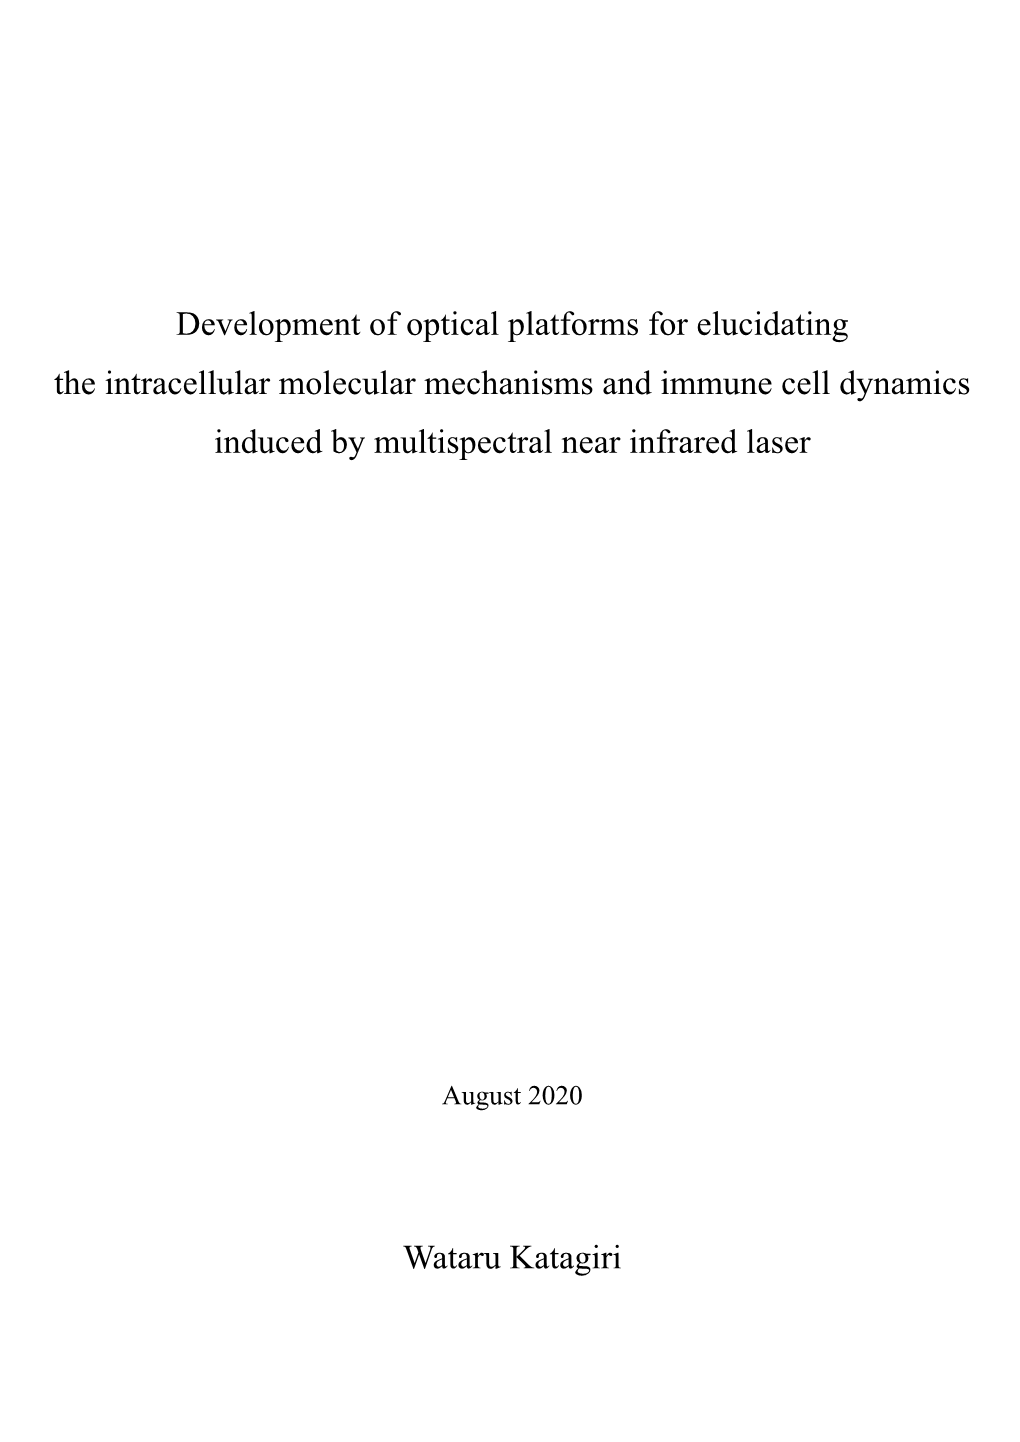 Development of Optical Platforms for Elucidating the Intracellular Molecular Mechanisms and Immune Cell Dynamics Induced by Multispectral Near Infrared Laser